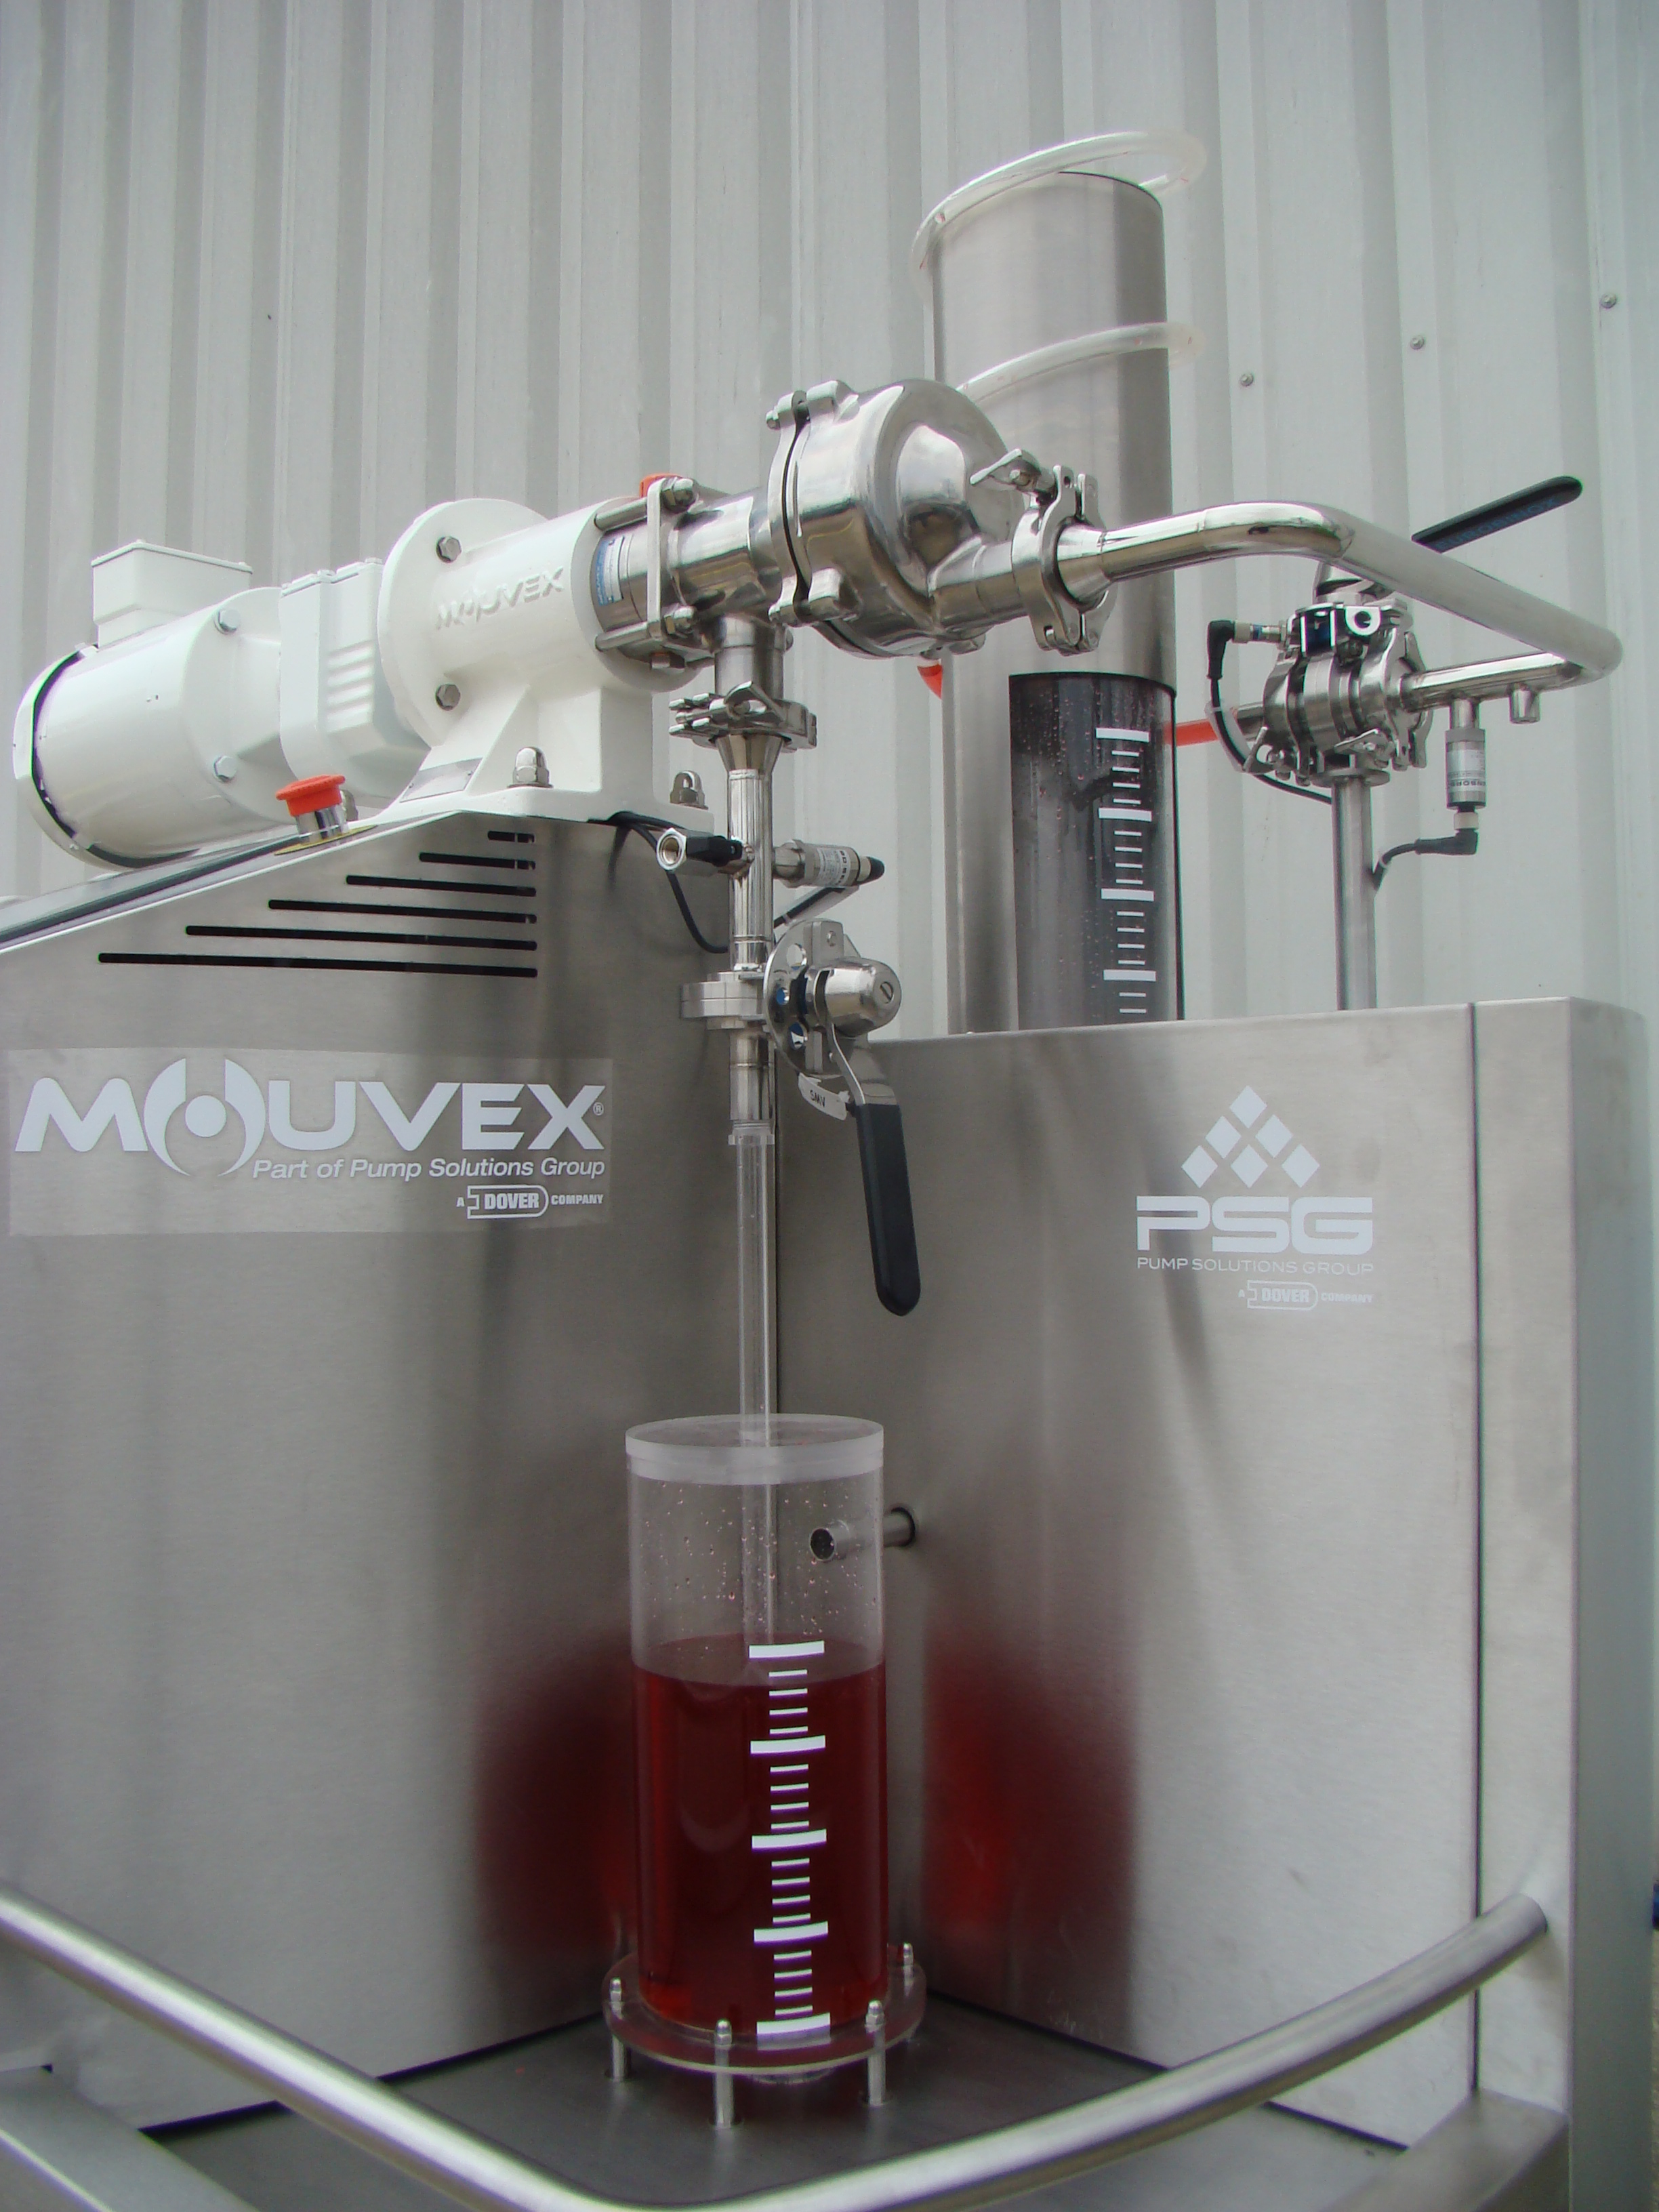 The Mouvex Product Recovery Demo unit will be in action at IFT18